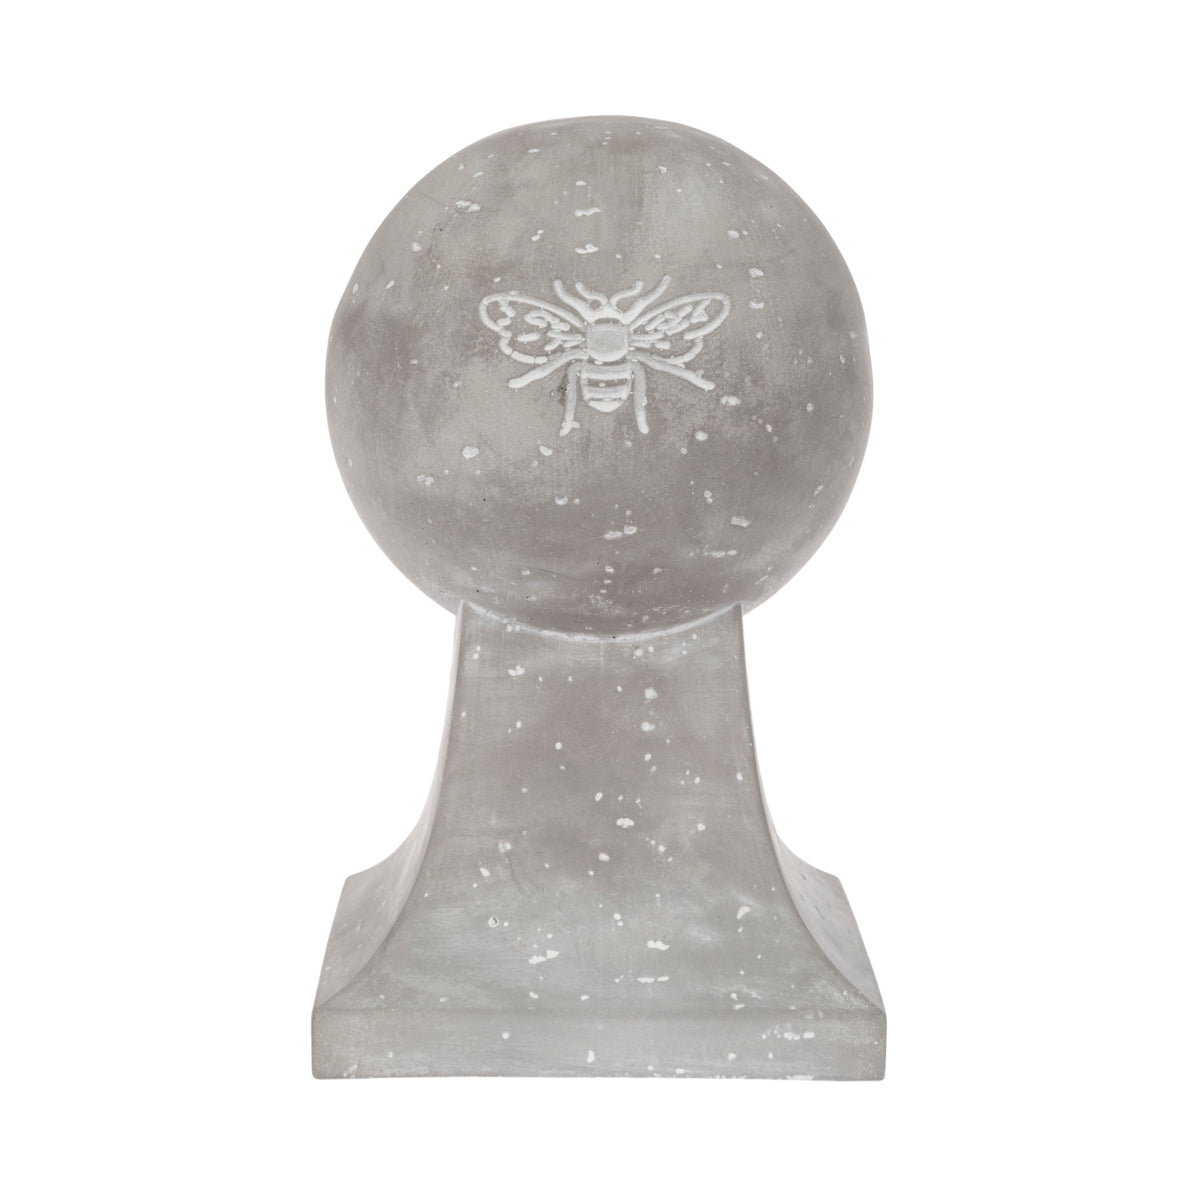 Bees Decorative Ball Plinth by Sophie Allport